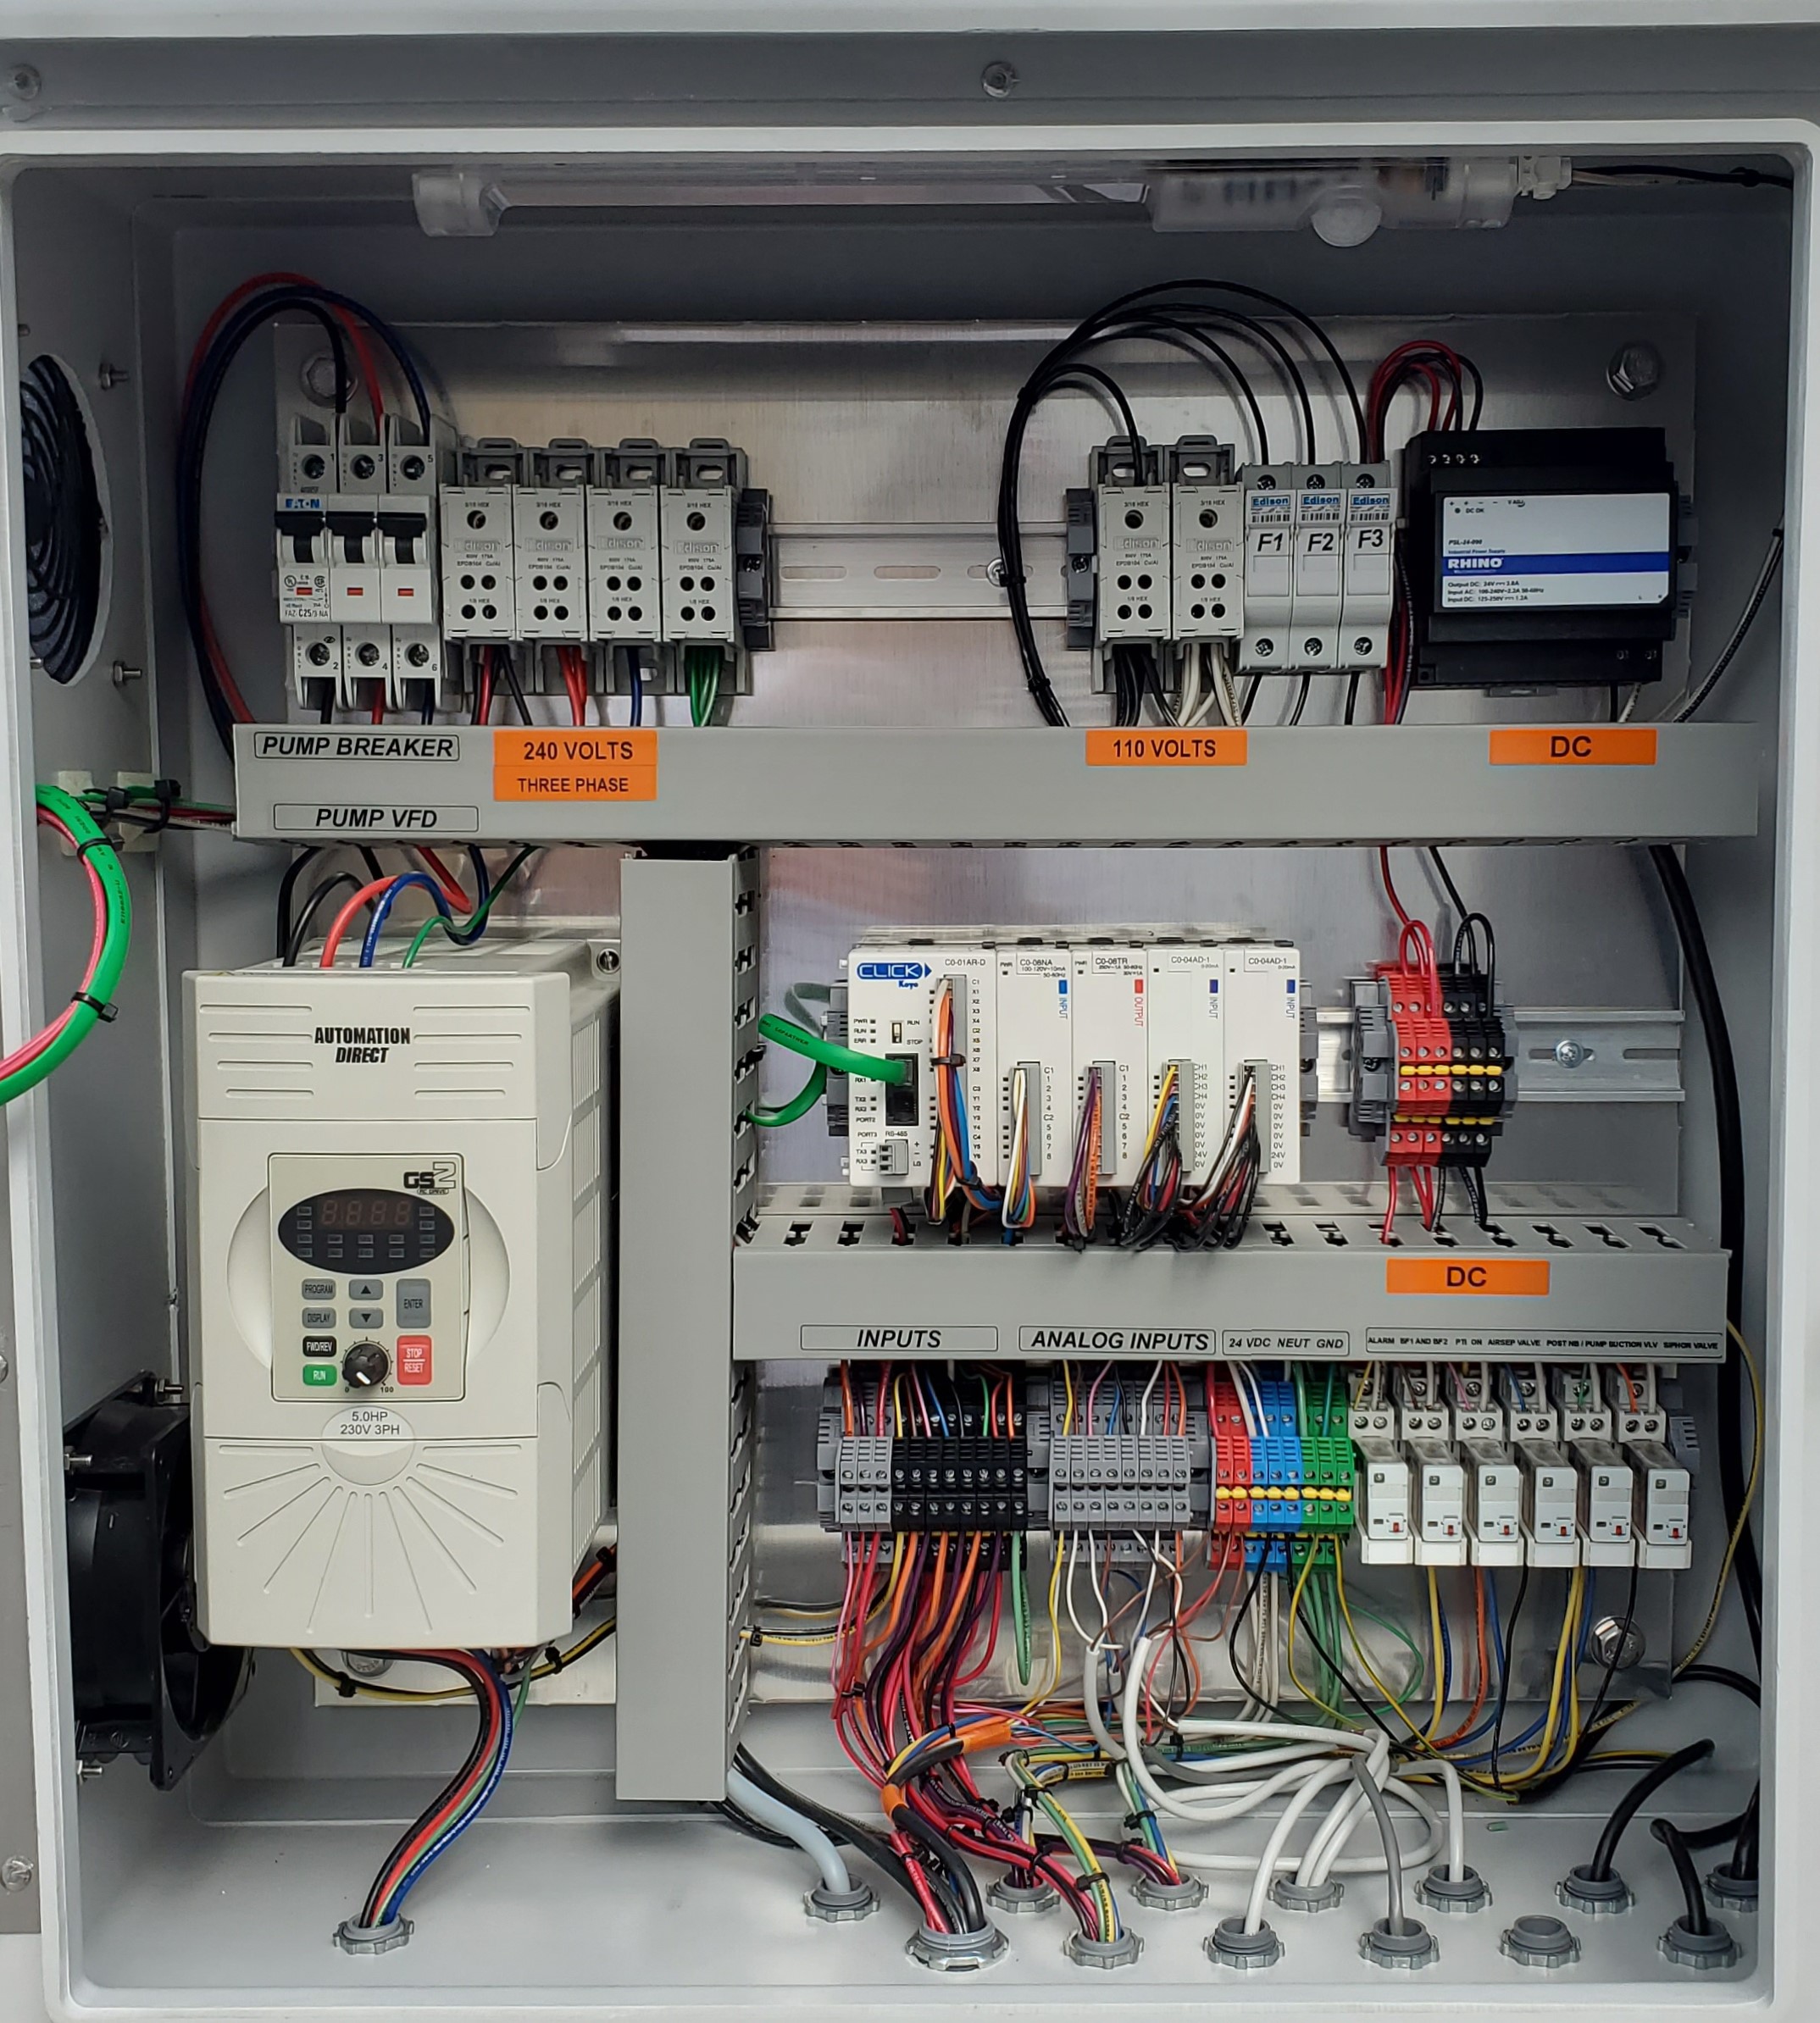 Fully automated variable control using PLC and VFD drive provides efficient use of oxidation